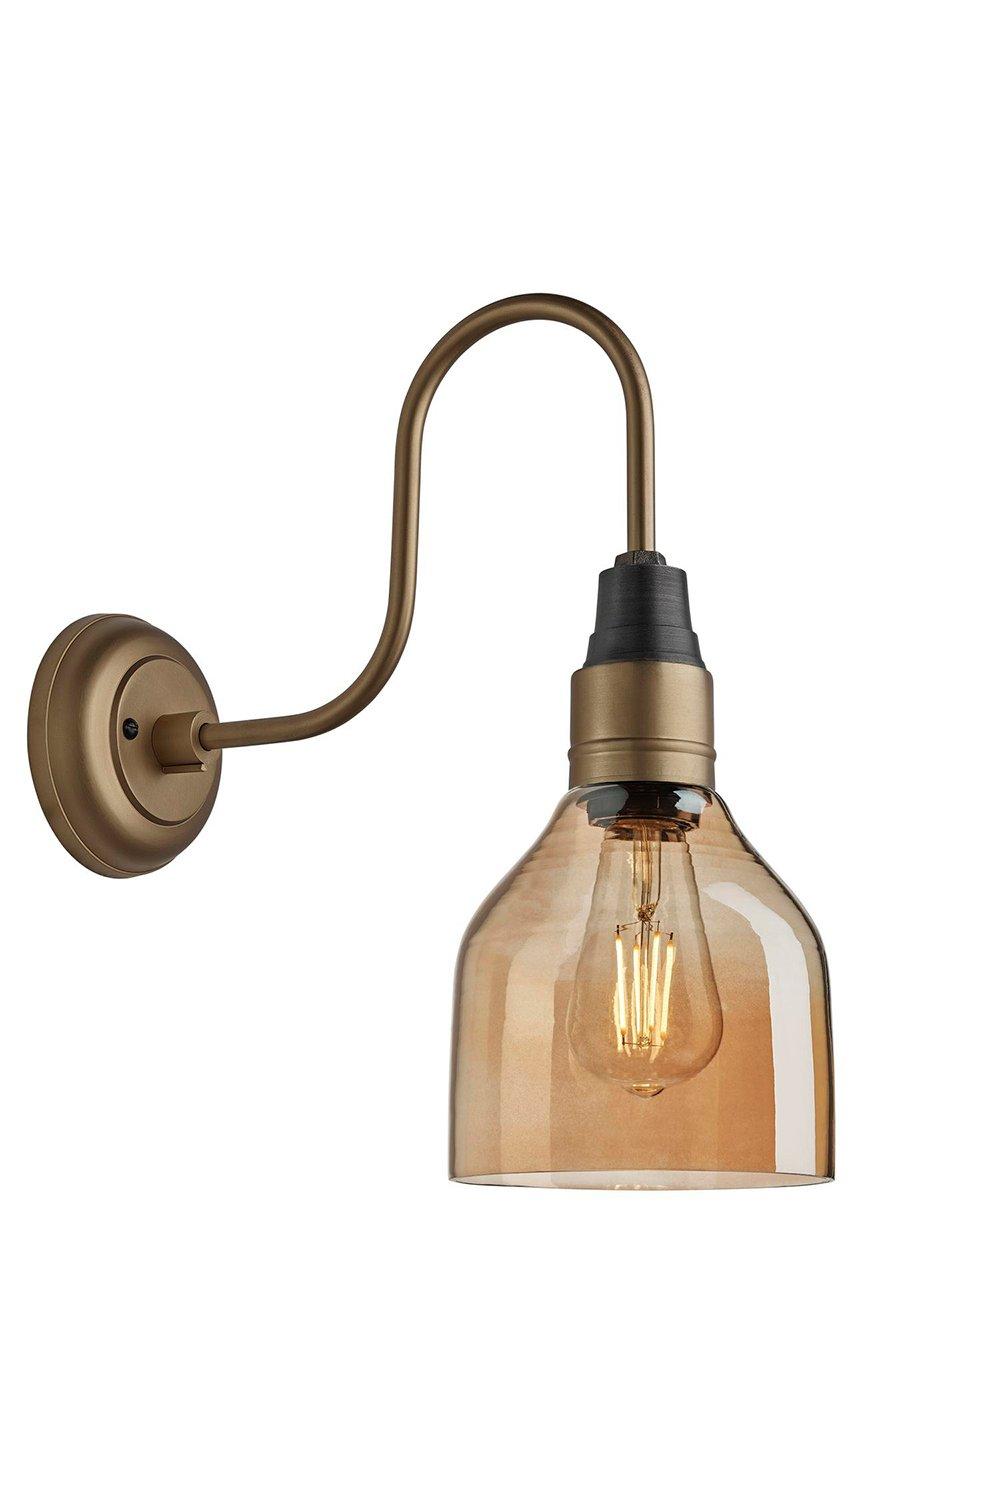 Swan Neck Tinted Glass Cone Wall Light, 6 Inch, Amber, Brass Holder